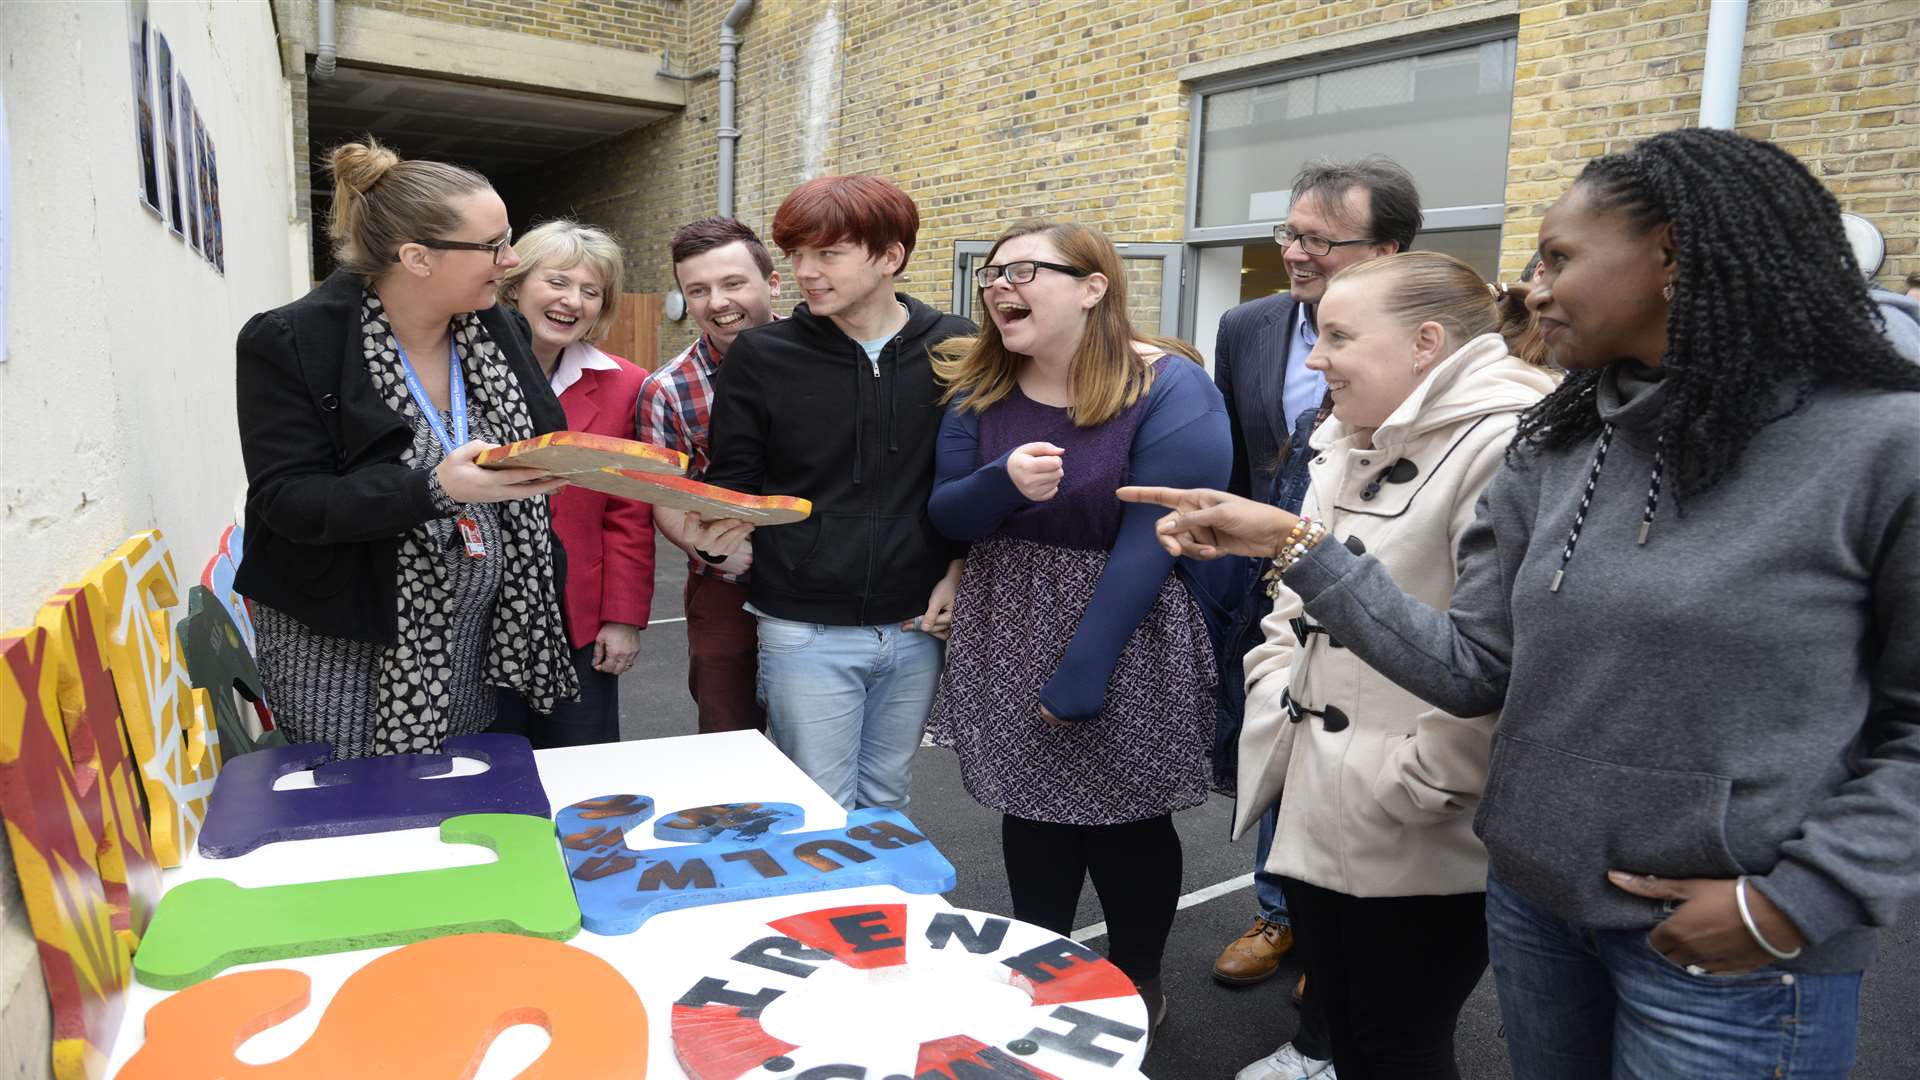 The KCC's Katie Batt and Jane Barber discuss the project with artists and volunteers at the unveiling of the Blank canvass project at the Sheerness Gateway